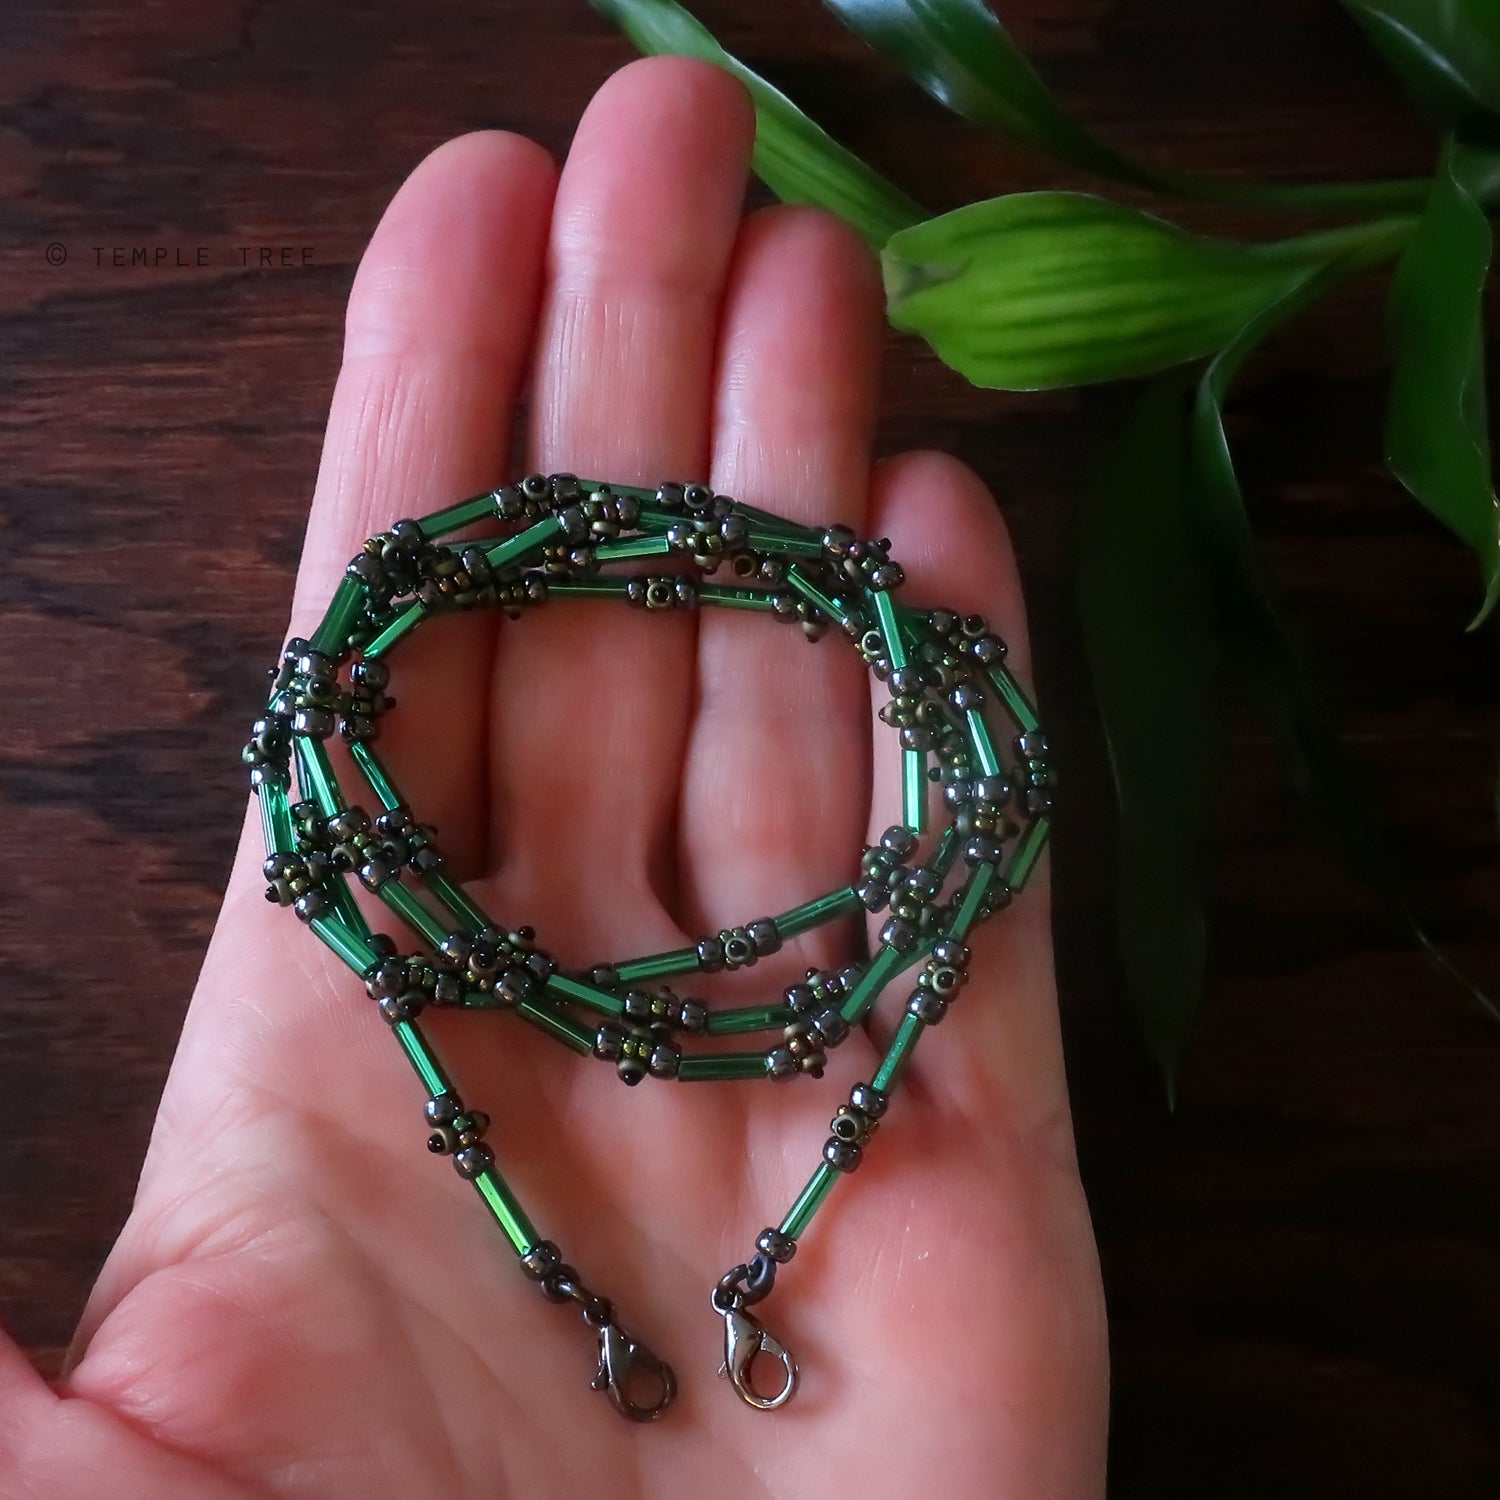 Temple Tree Lost Circuitry Beadwoven Mask Lanyard with Rivets - Green